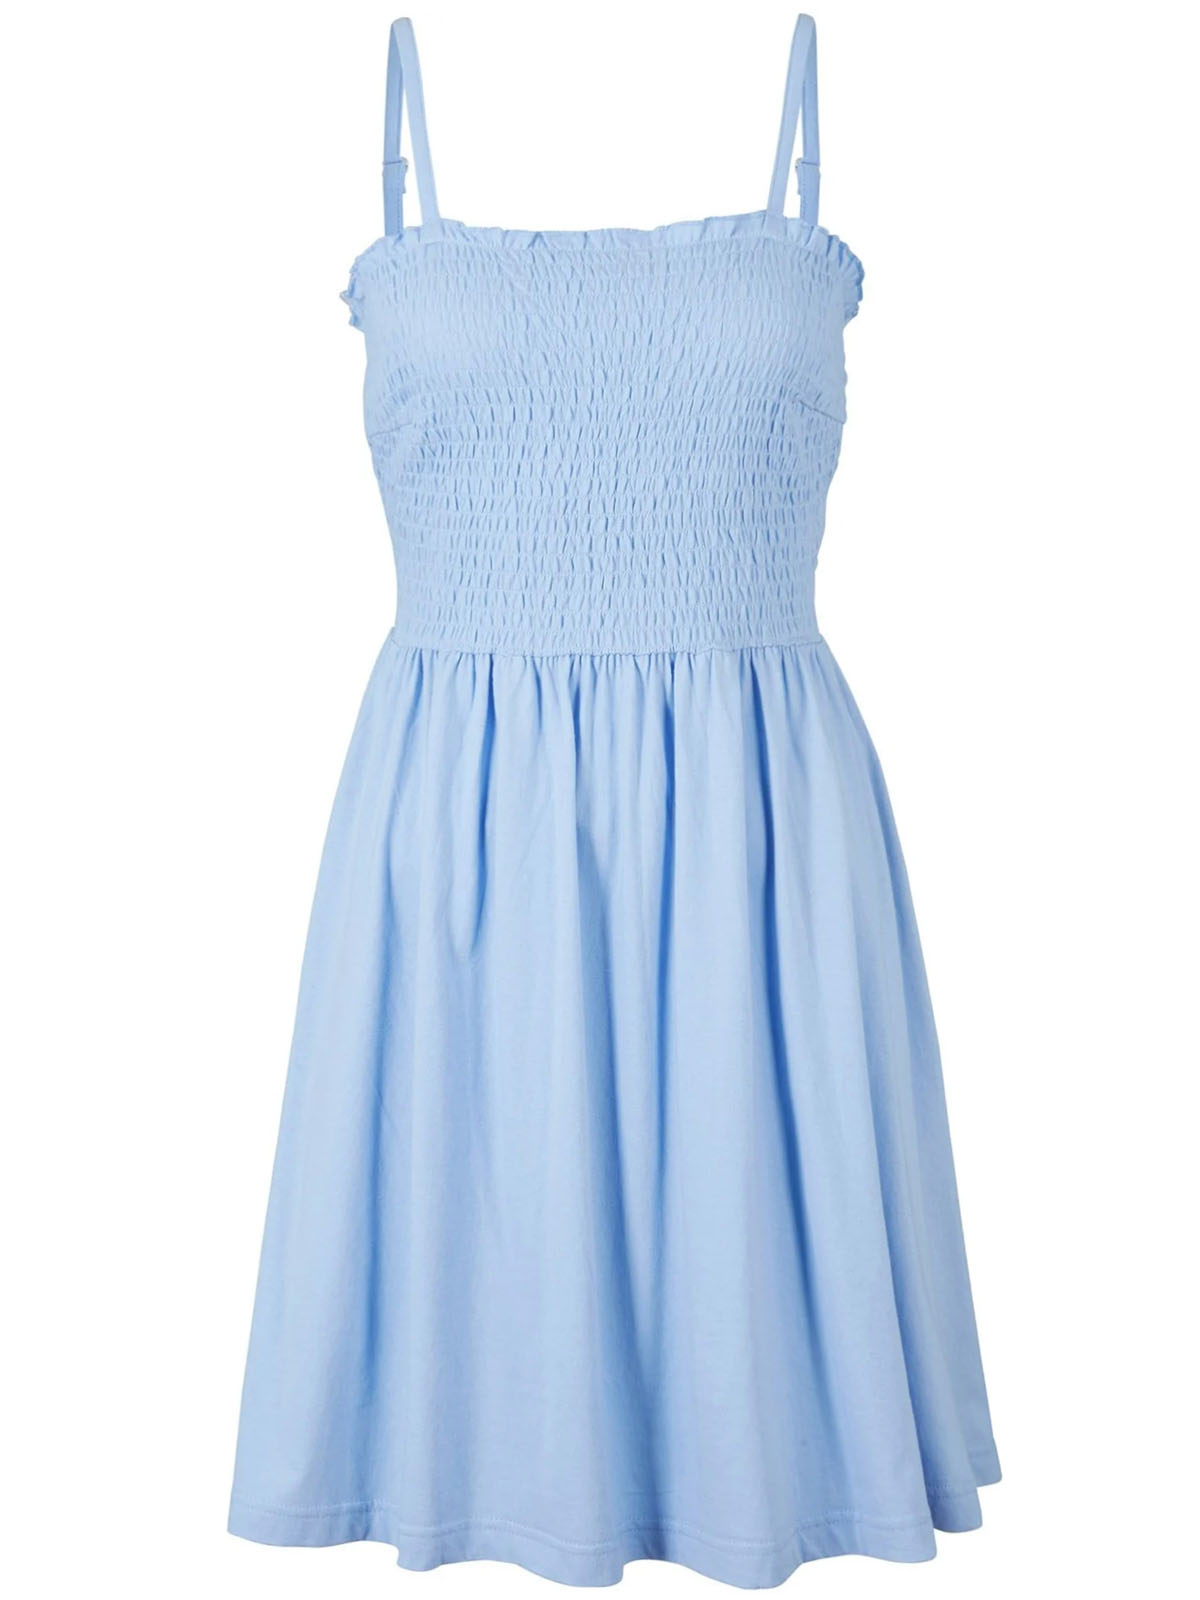 BPC - - BPC SKY-BLUE Pure Cotton Shirred Strappy Dress - Size 10/12 to ...